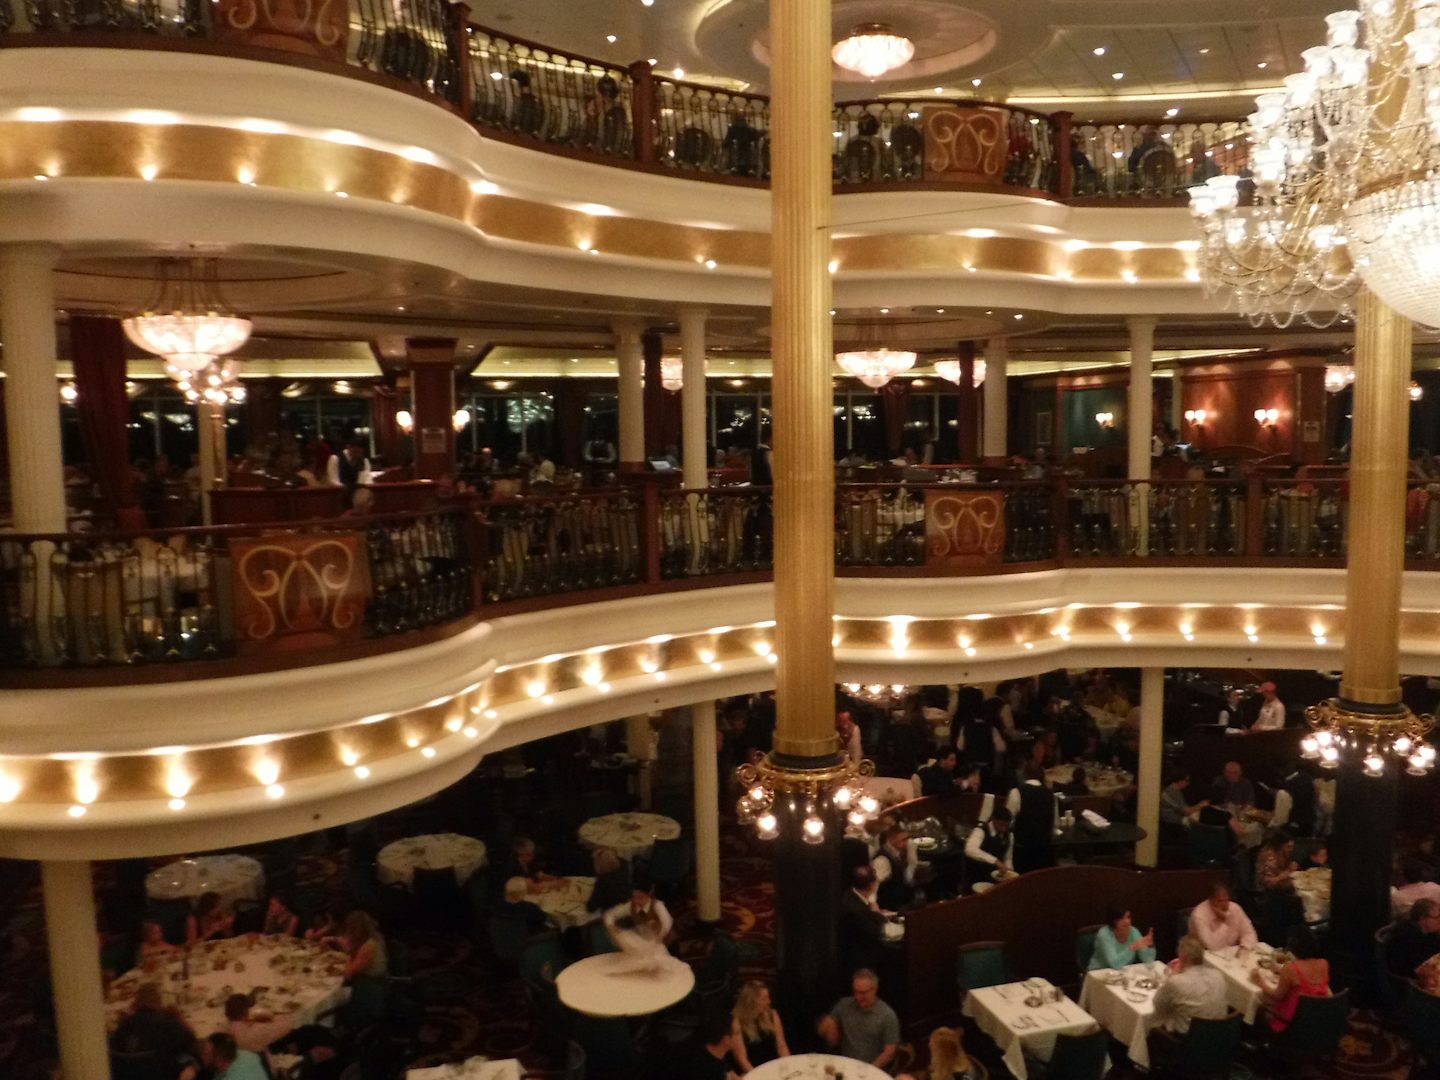 The dinning rooms are located on Decks 3,4 and 5 and are aft.  Depending on